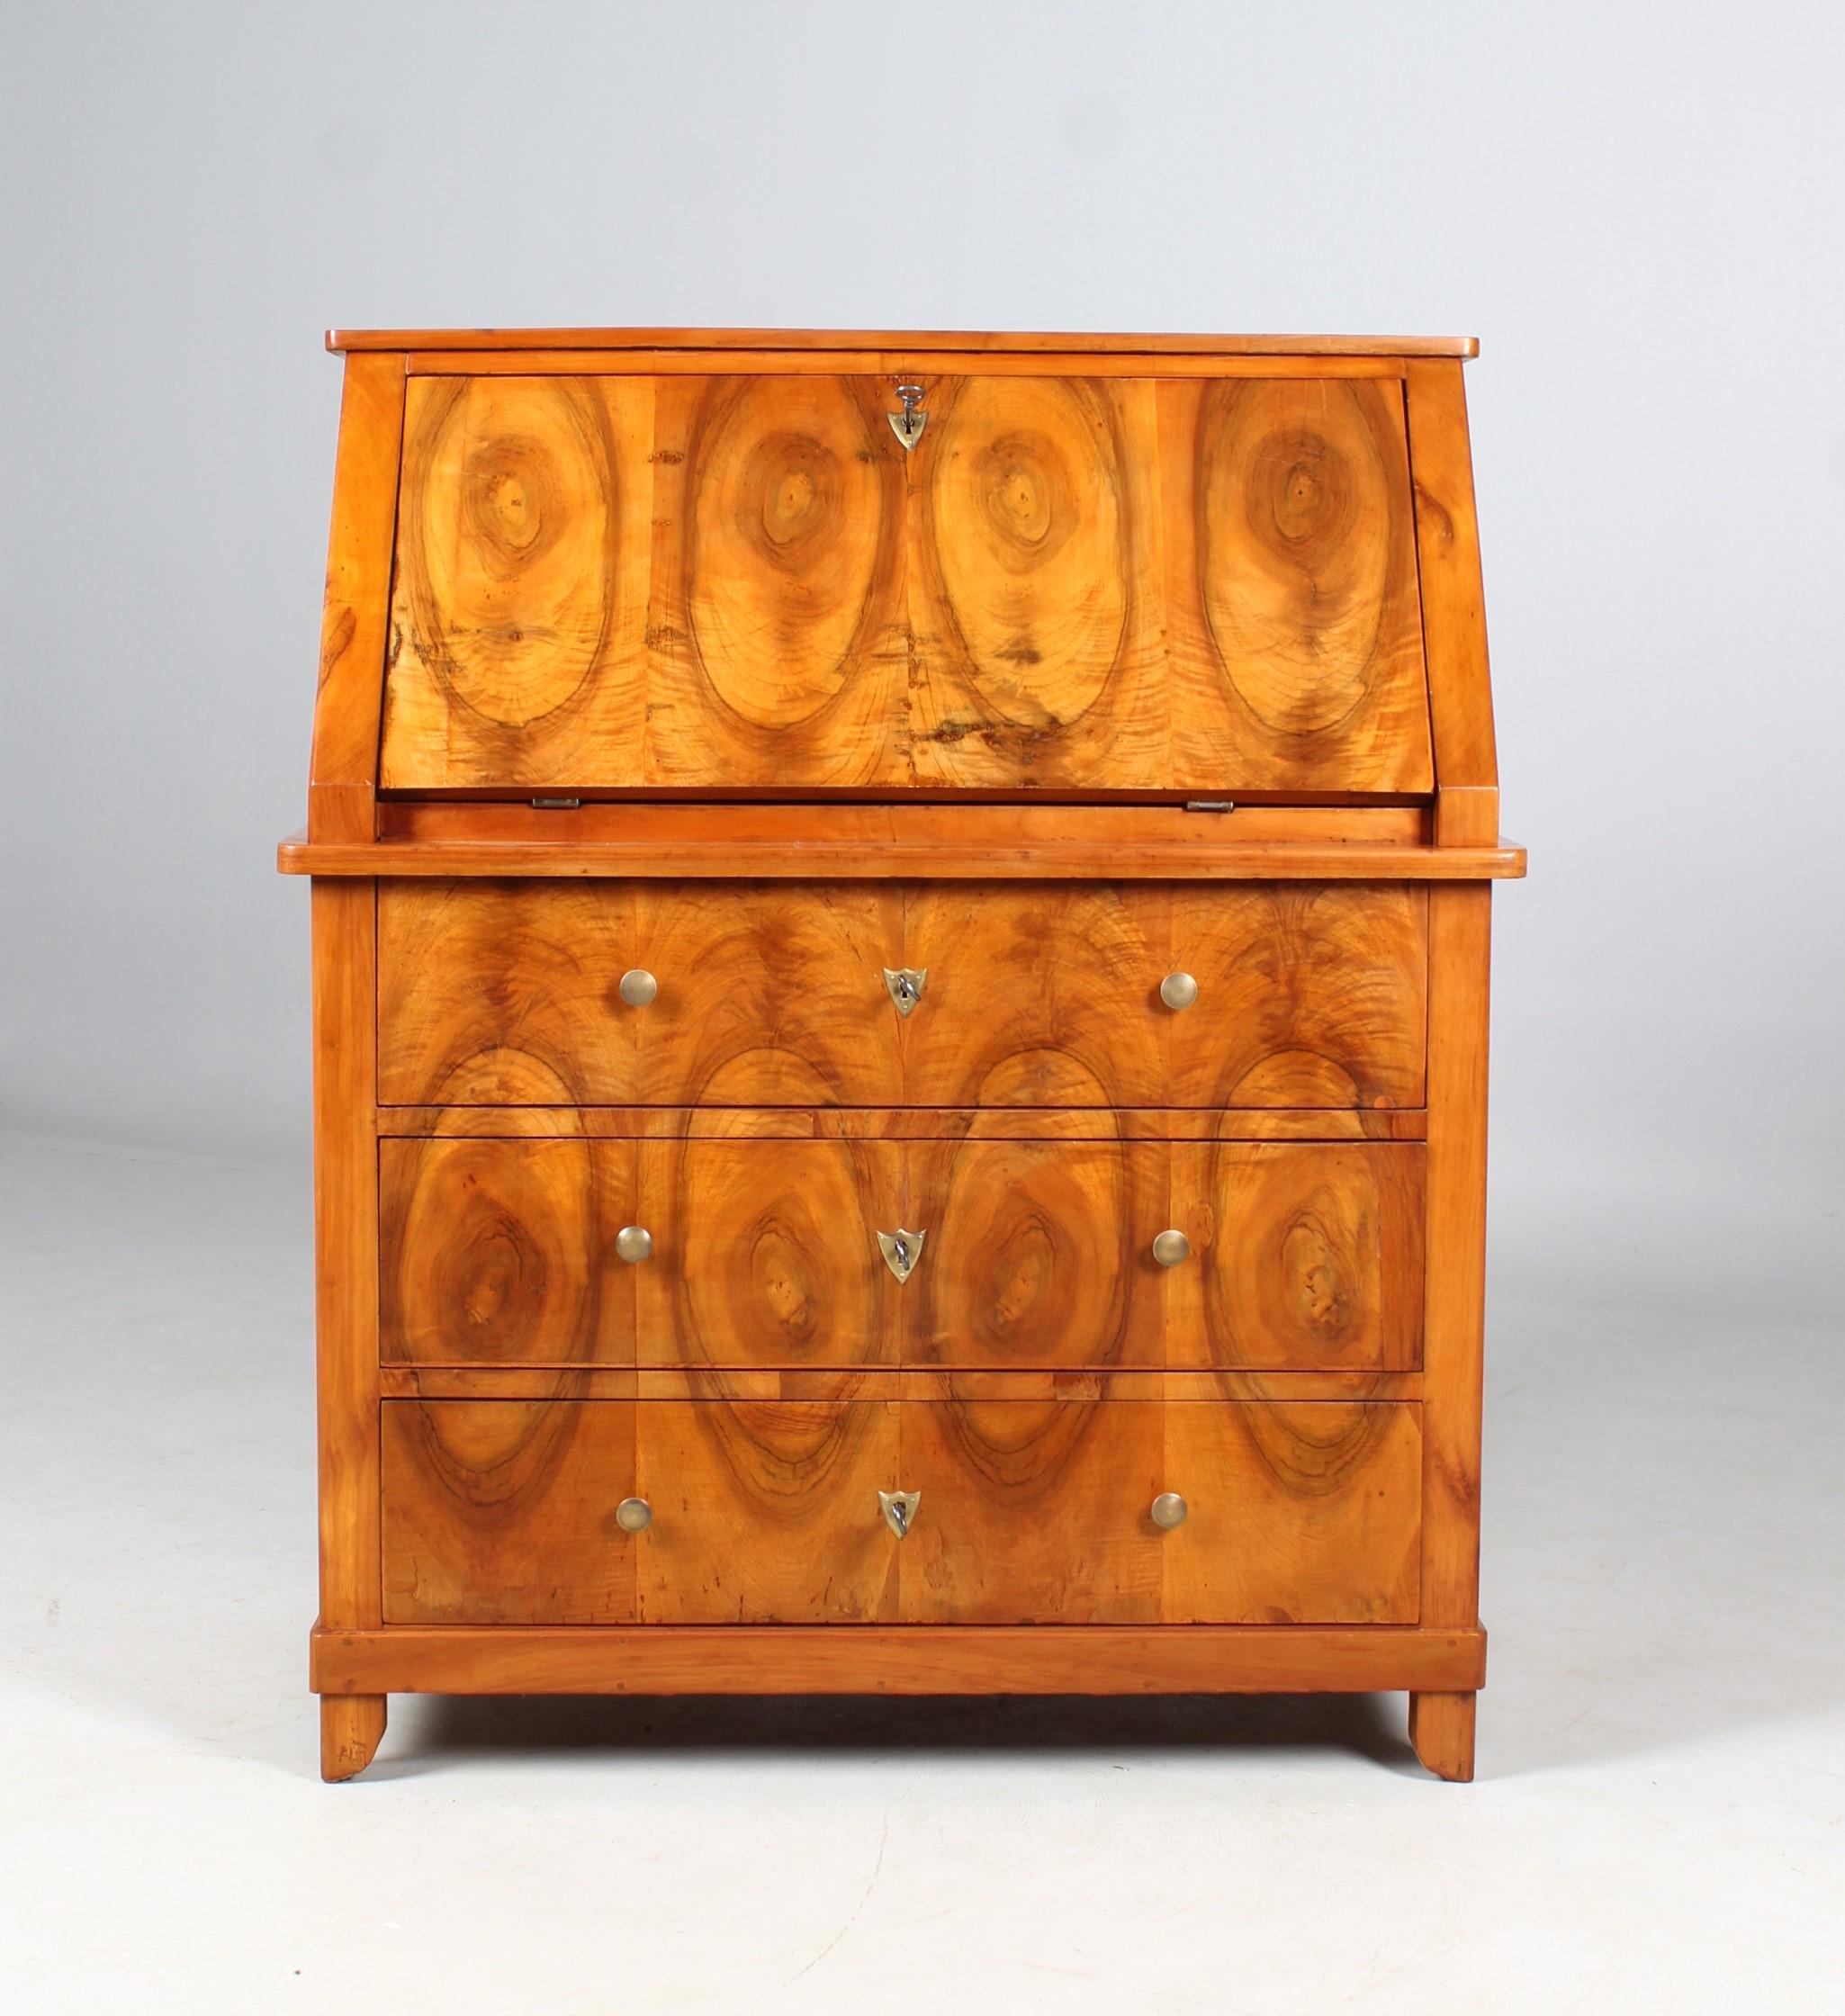 Antique cabinet secretary from the biedermeier period around 1845.
Body in cherry, parts of the front and the wreath veneered in walnut. Handles and fittings made of brass in the shape of coat of arms.

The secretary can be disassembled into